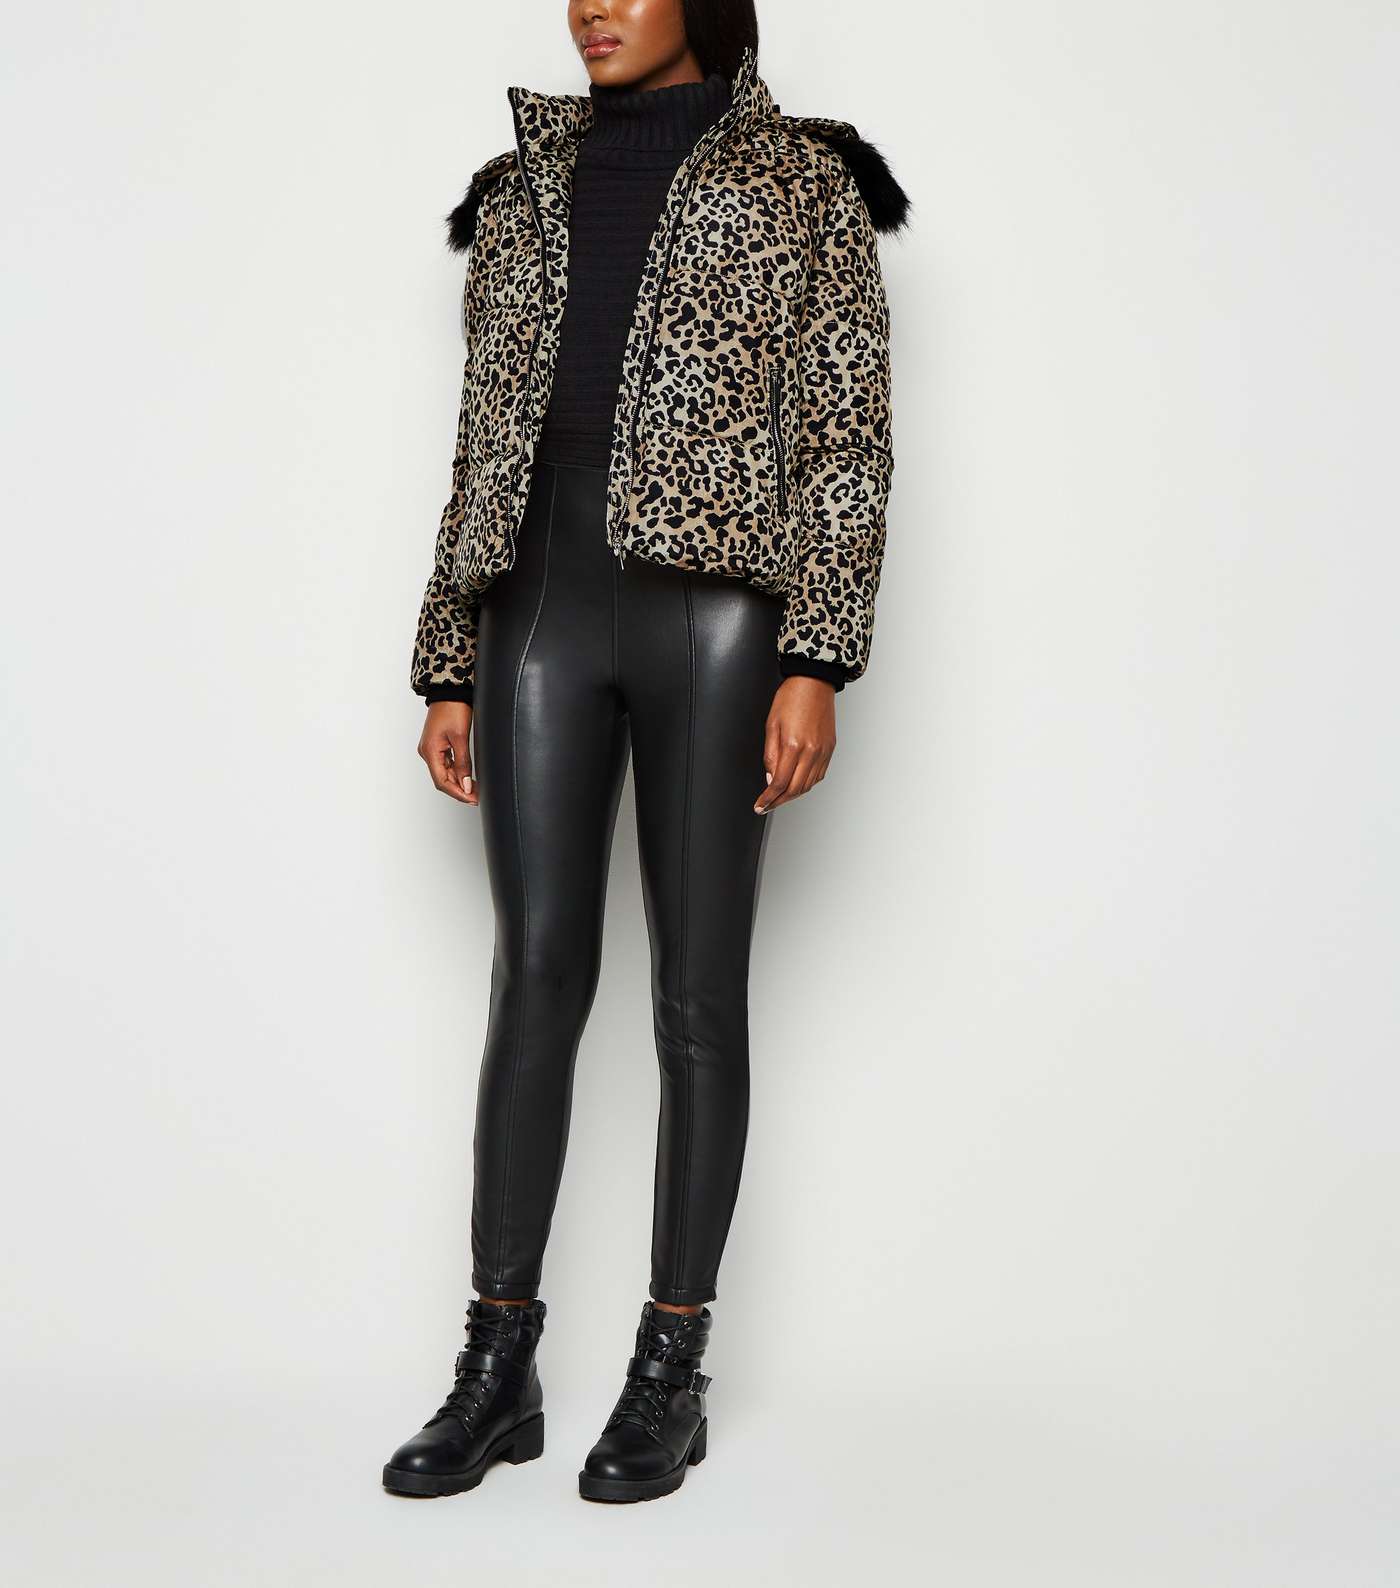 Cameo Rose Brown Leopard Print Puffer Jacket Image 2